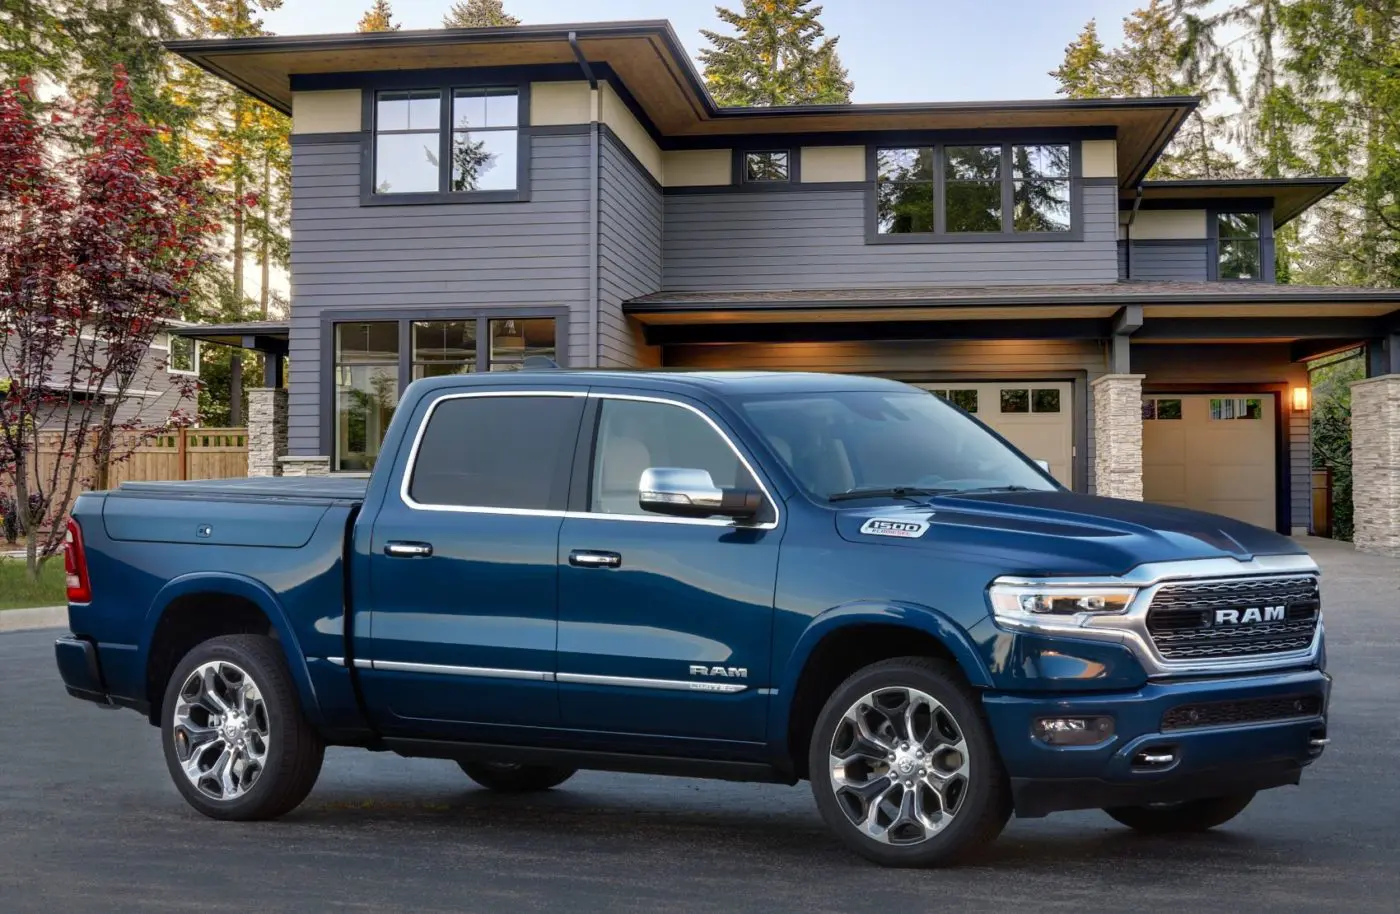 2022 Ram 1500 Limited Edition Celebrates a Decade of Cool Trucks